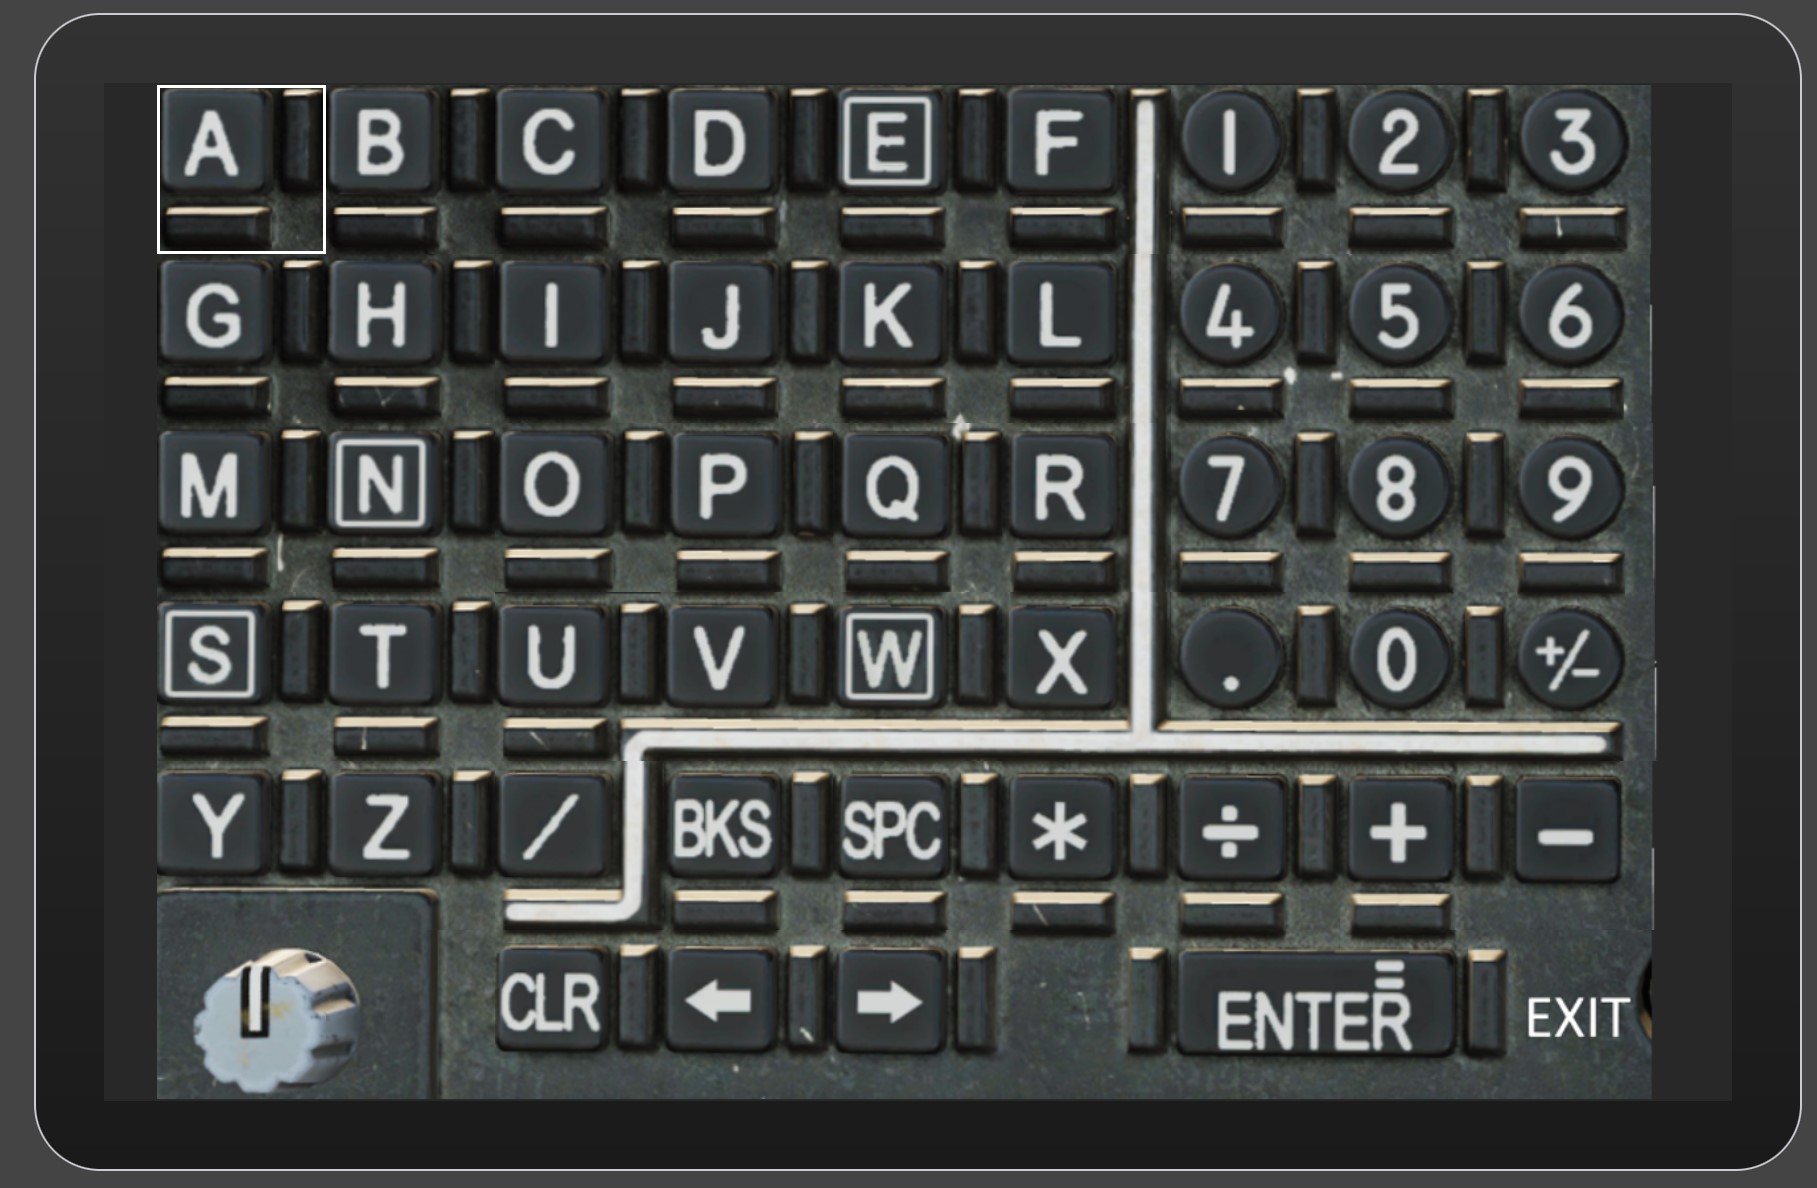  AH-64D Keyboard Unit Page for Touch Portal v1.0